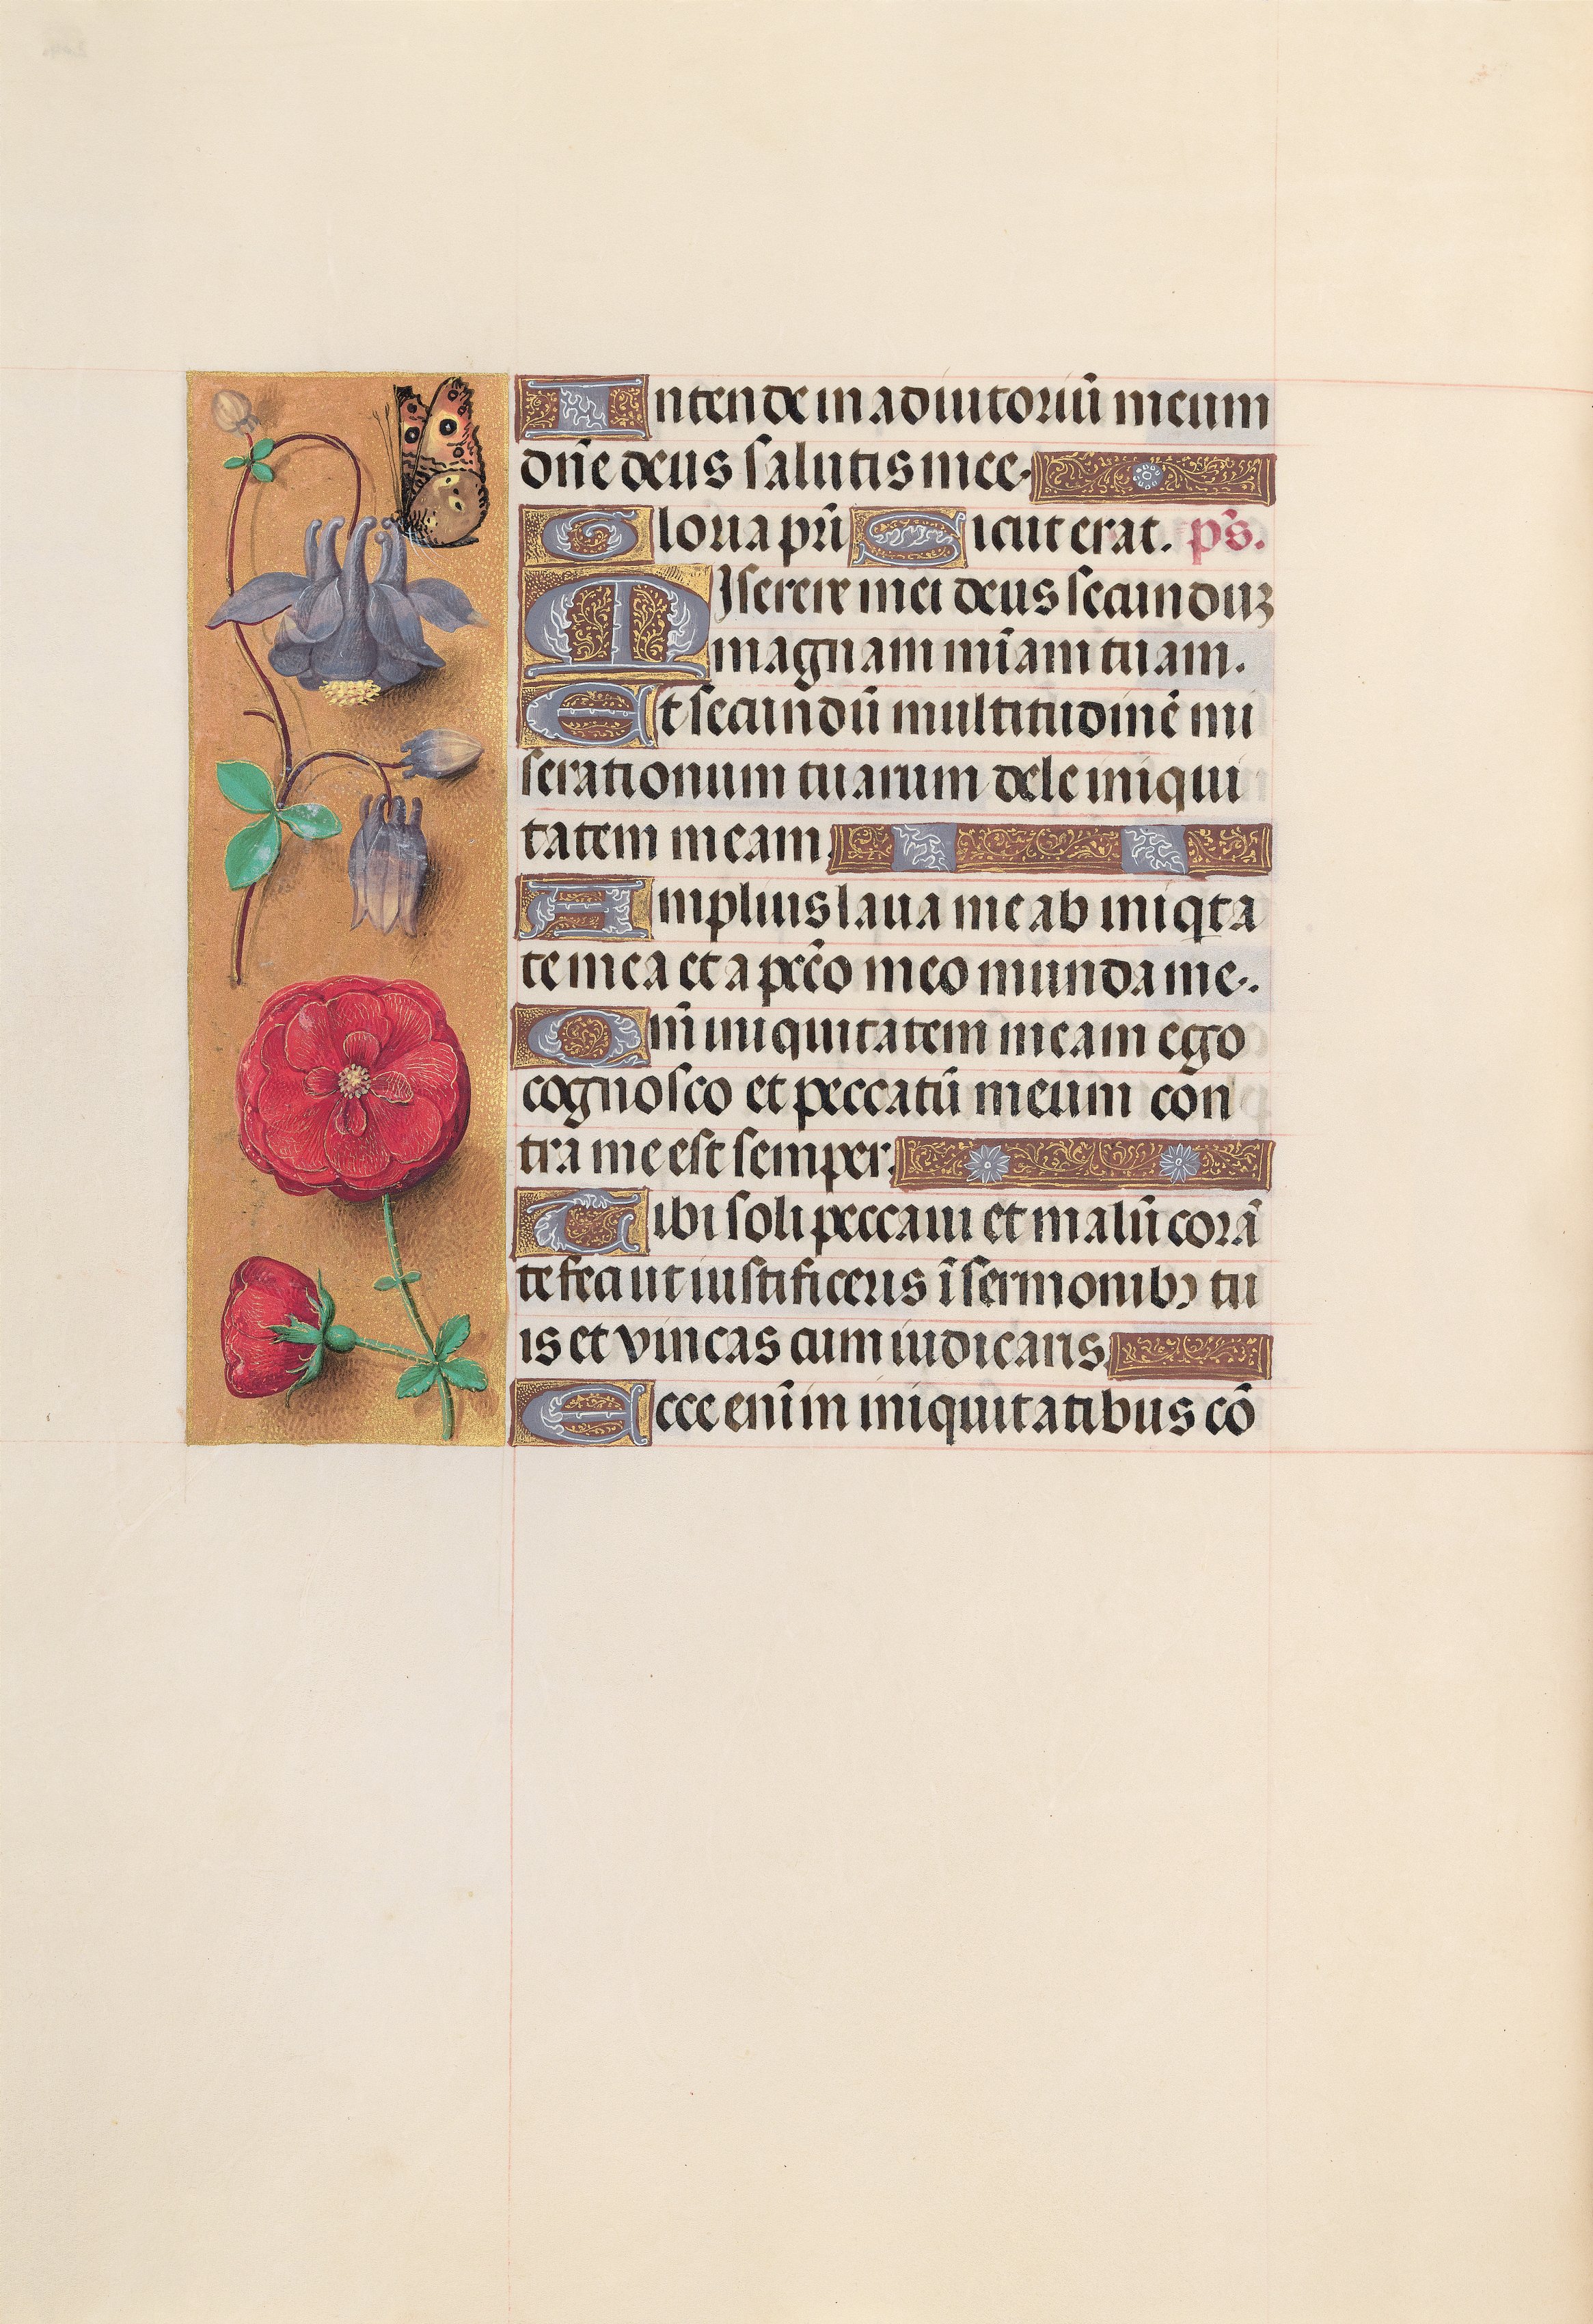 Hours of Queen Isabella the Catholic, Queen of Spain:  Fol. 204v